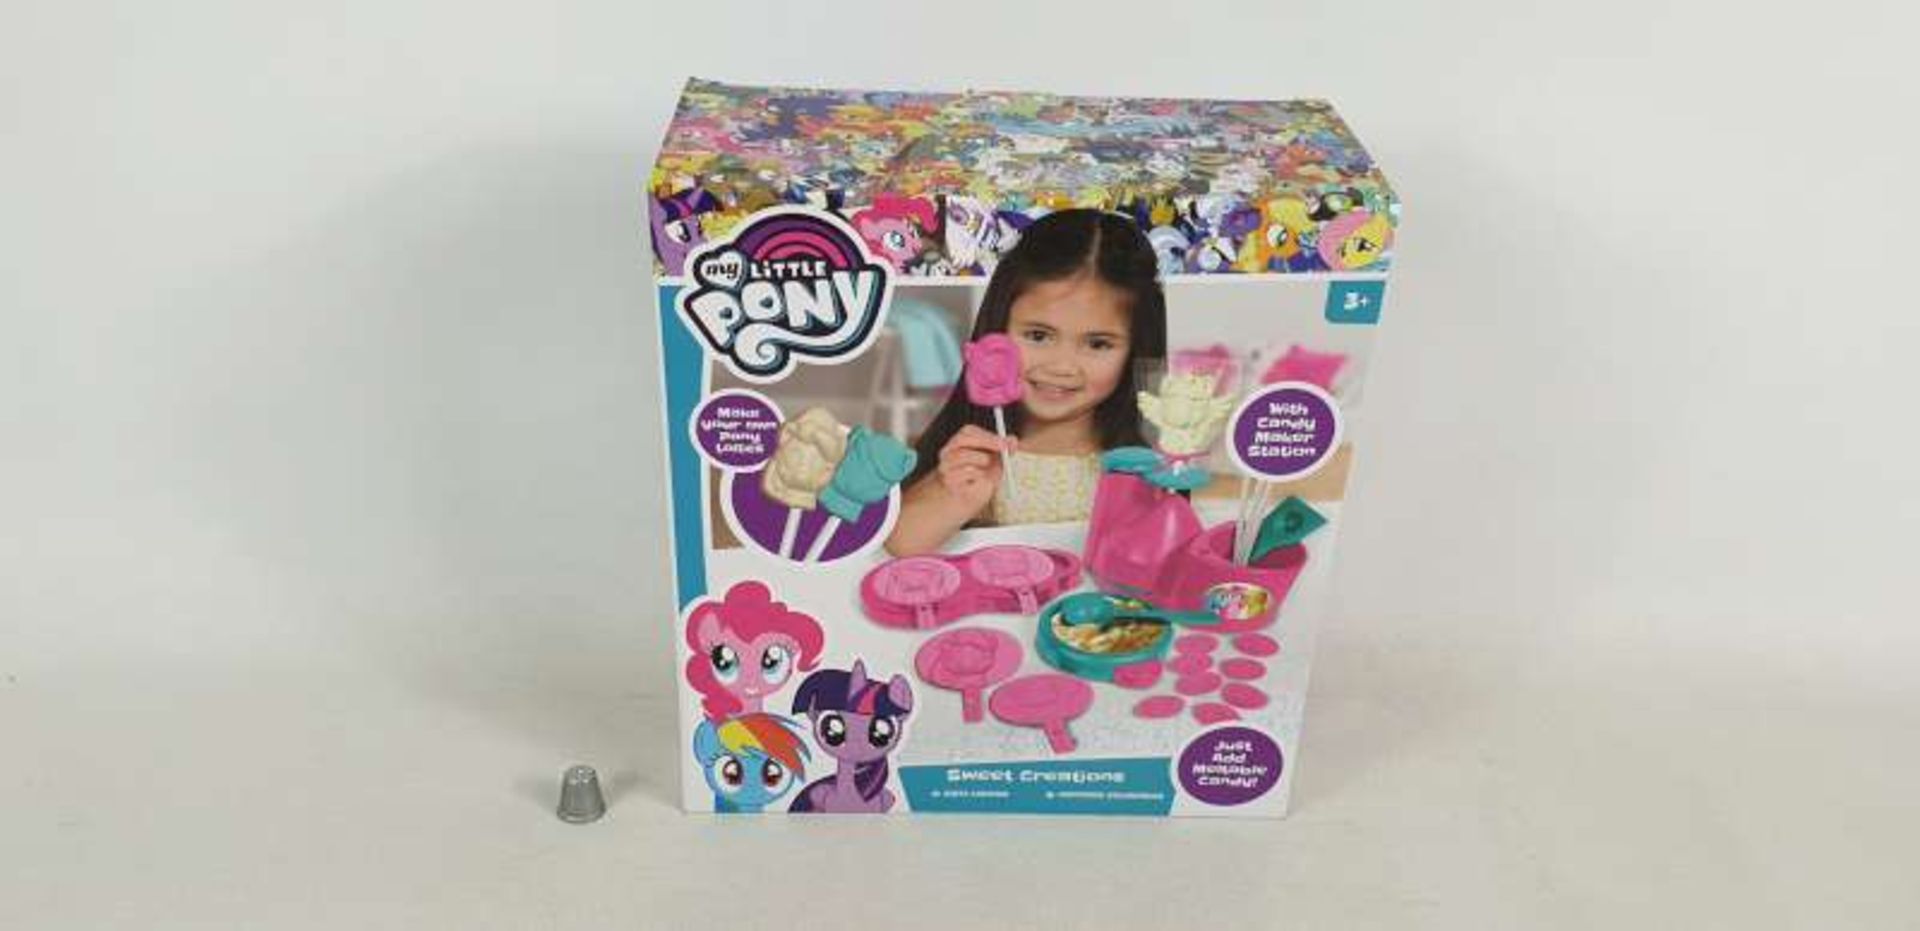 40 X BRAND NEW BOXED MY LITTLE PONY SWEET CREATIONS IN 5 BOXES